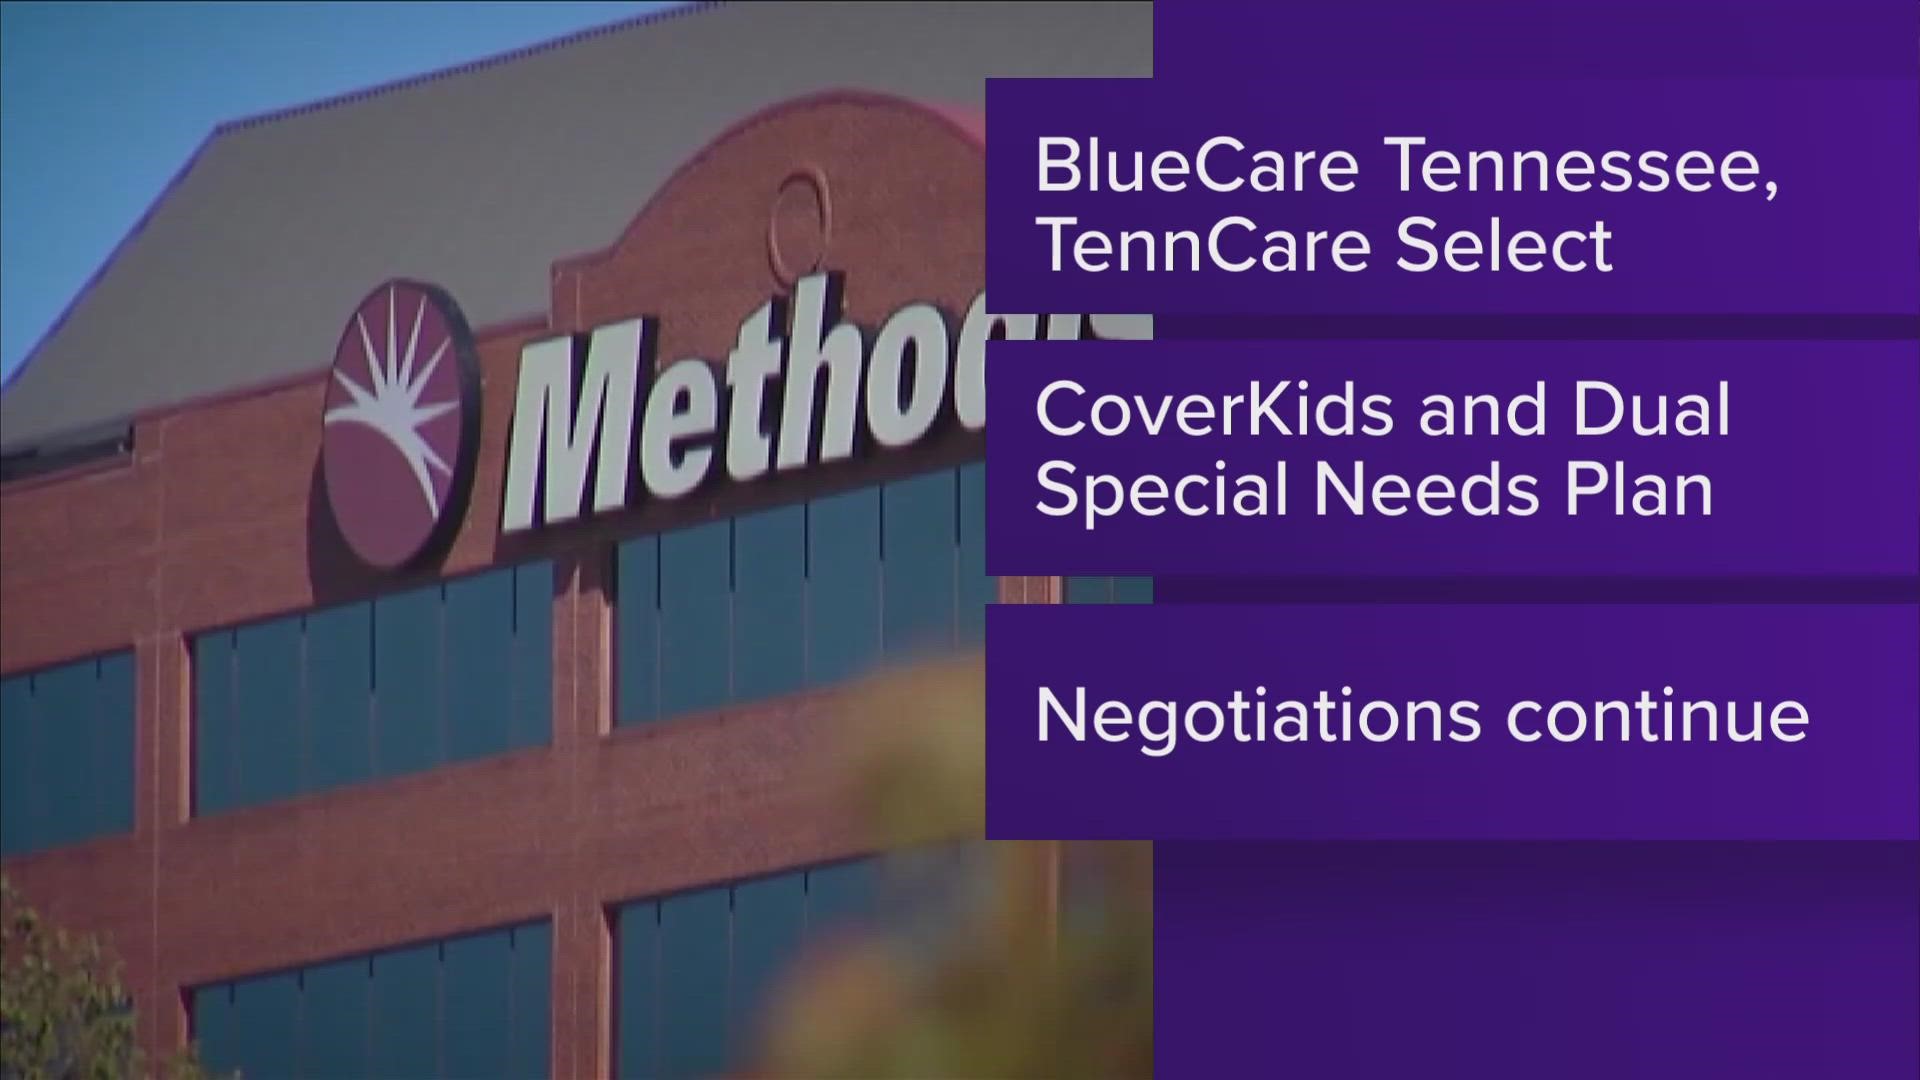 The companies said the agreement affects members covered by BlueCare Tennessee, TennCare Select, CoverKids and BlueCare Plus, the Dual Special Needs Plan (D-SNP).